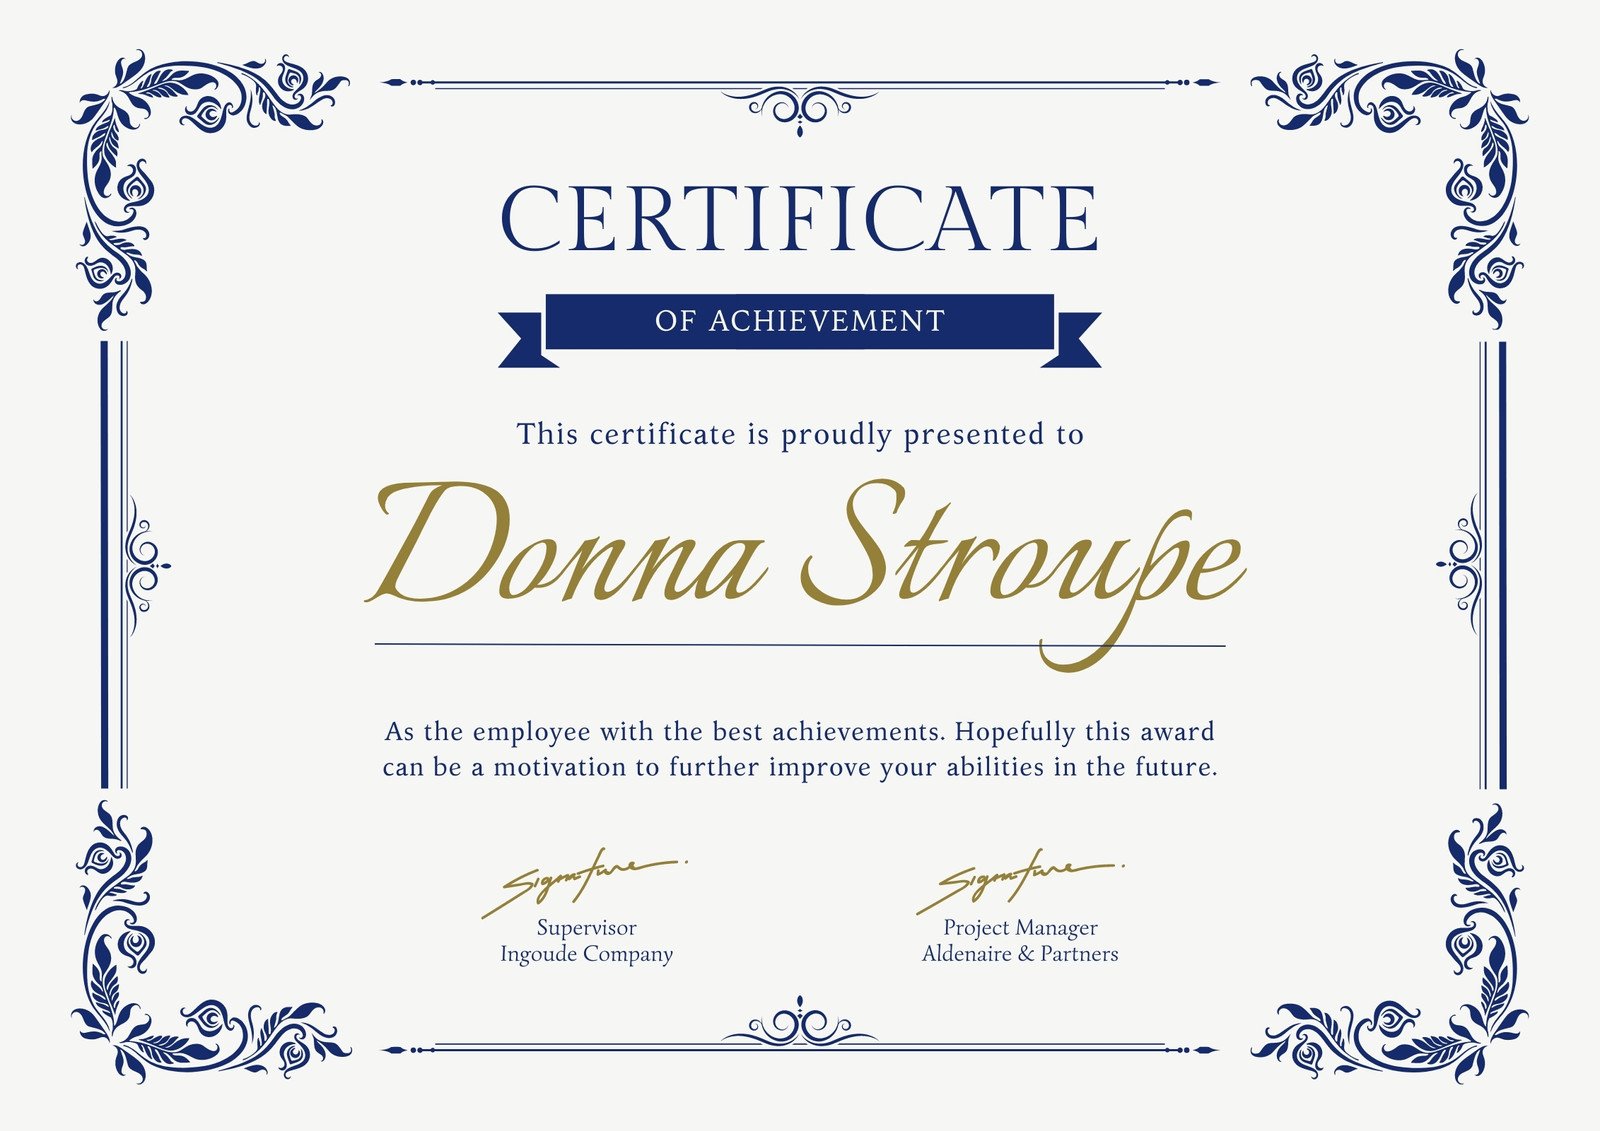 Free Software Online Training Certificate Template - Download in